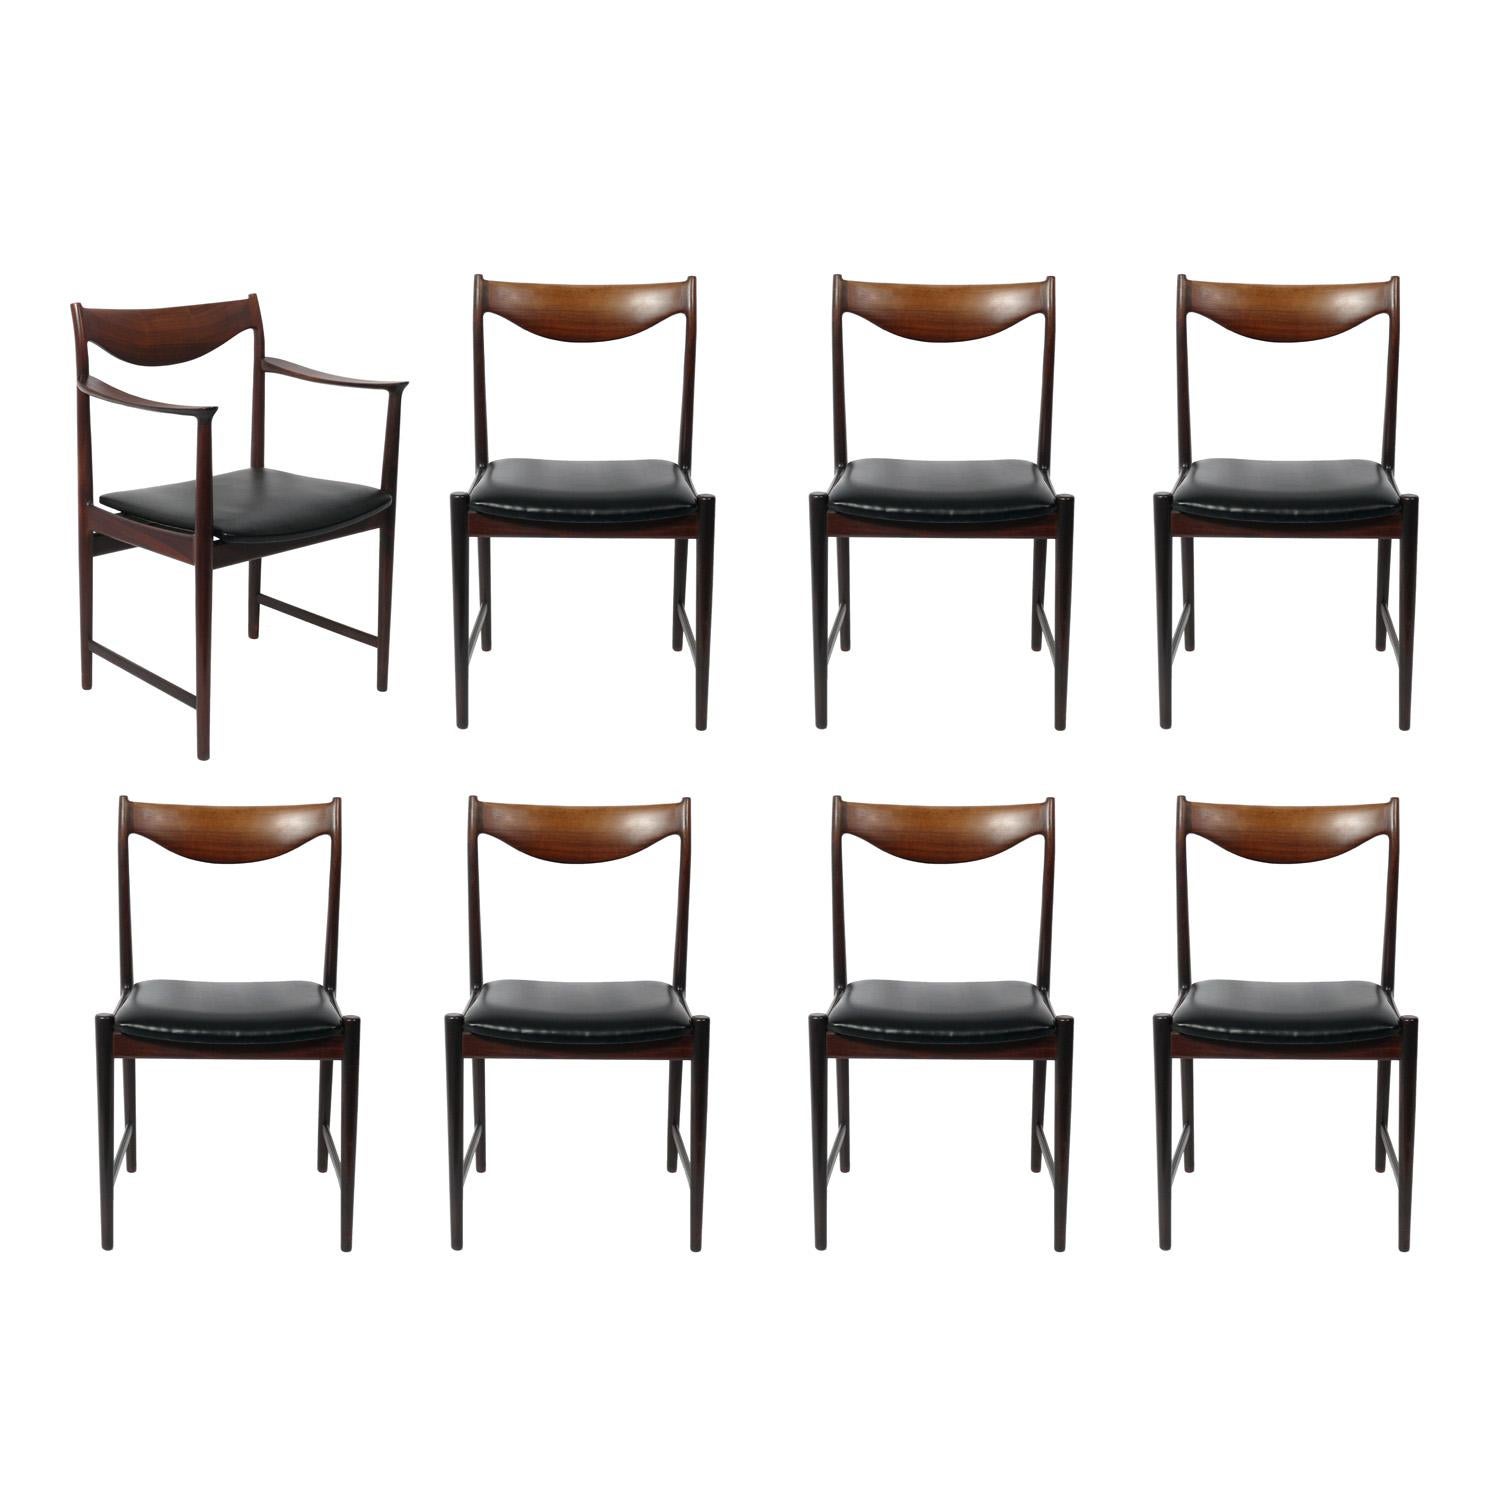 Set of Eight Danish Modern Rosewood Dining Chairs designed by Torbjorn Afdal